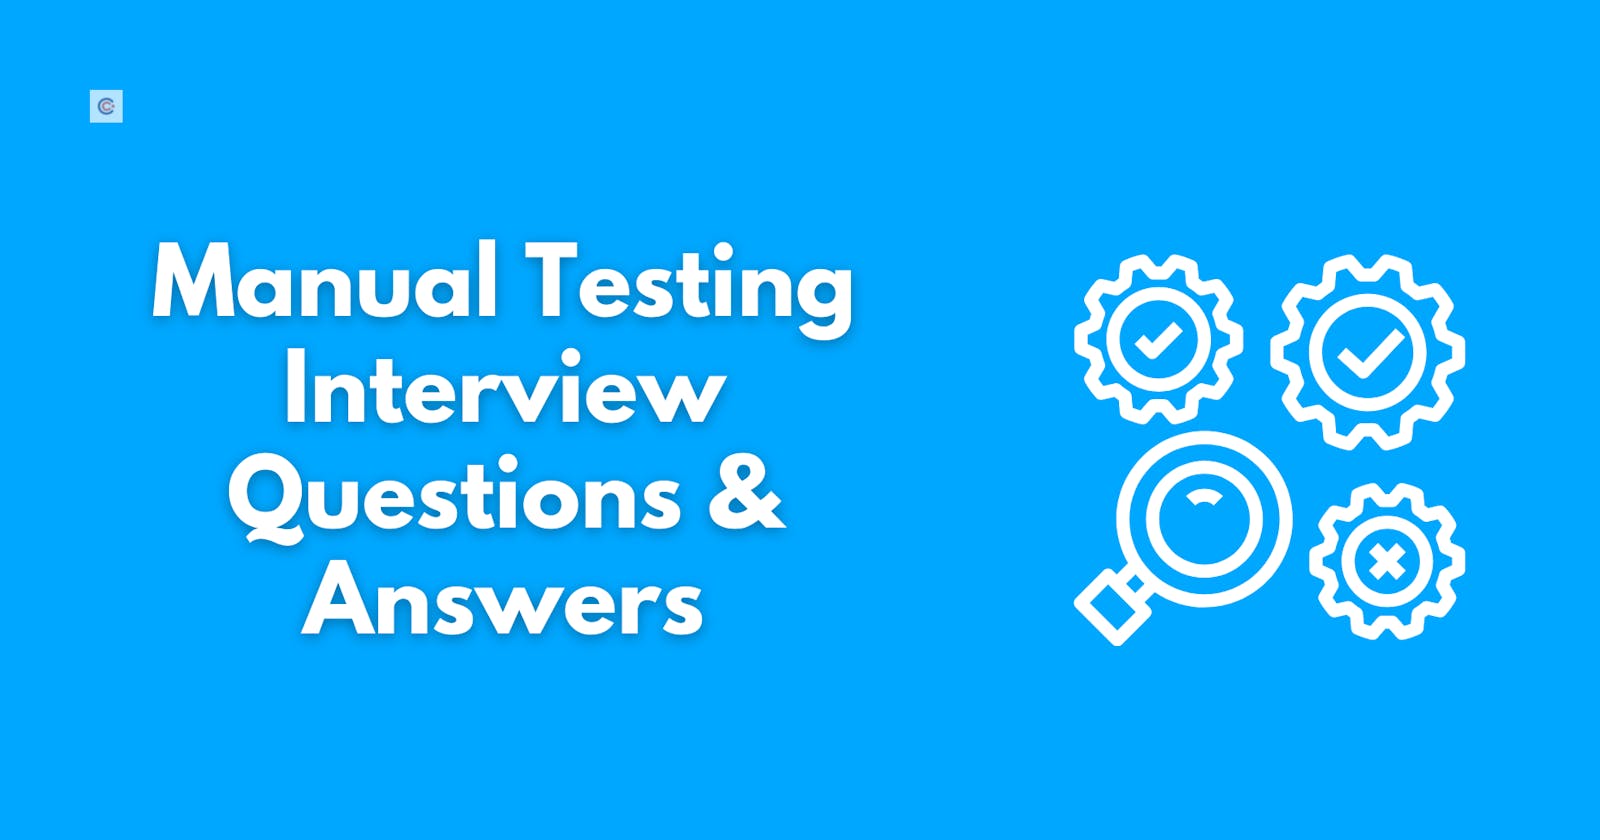 Top 50 Manual Testing Interview Questions & Answers To Master Software Testing